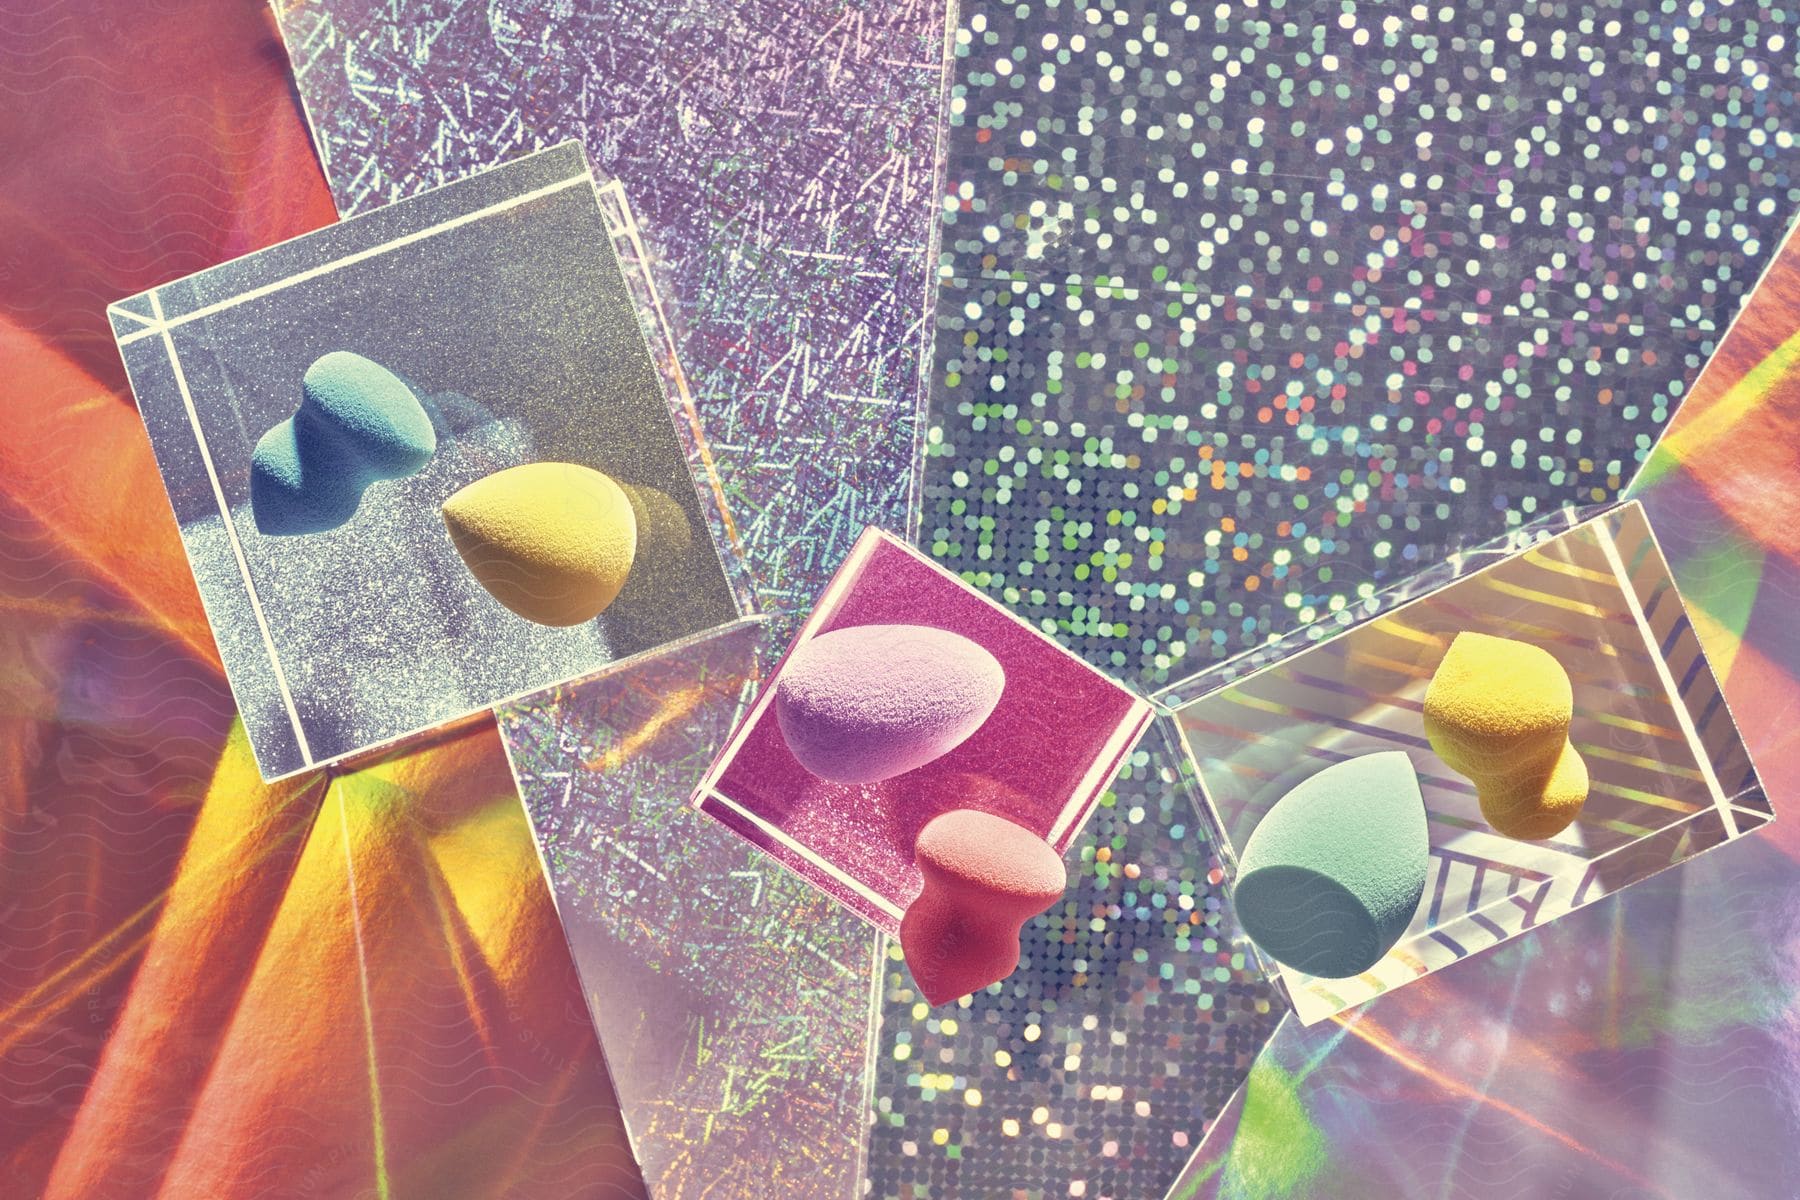 Colorful makeup sponges arranged in a chaotic manner over an abstract background